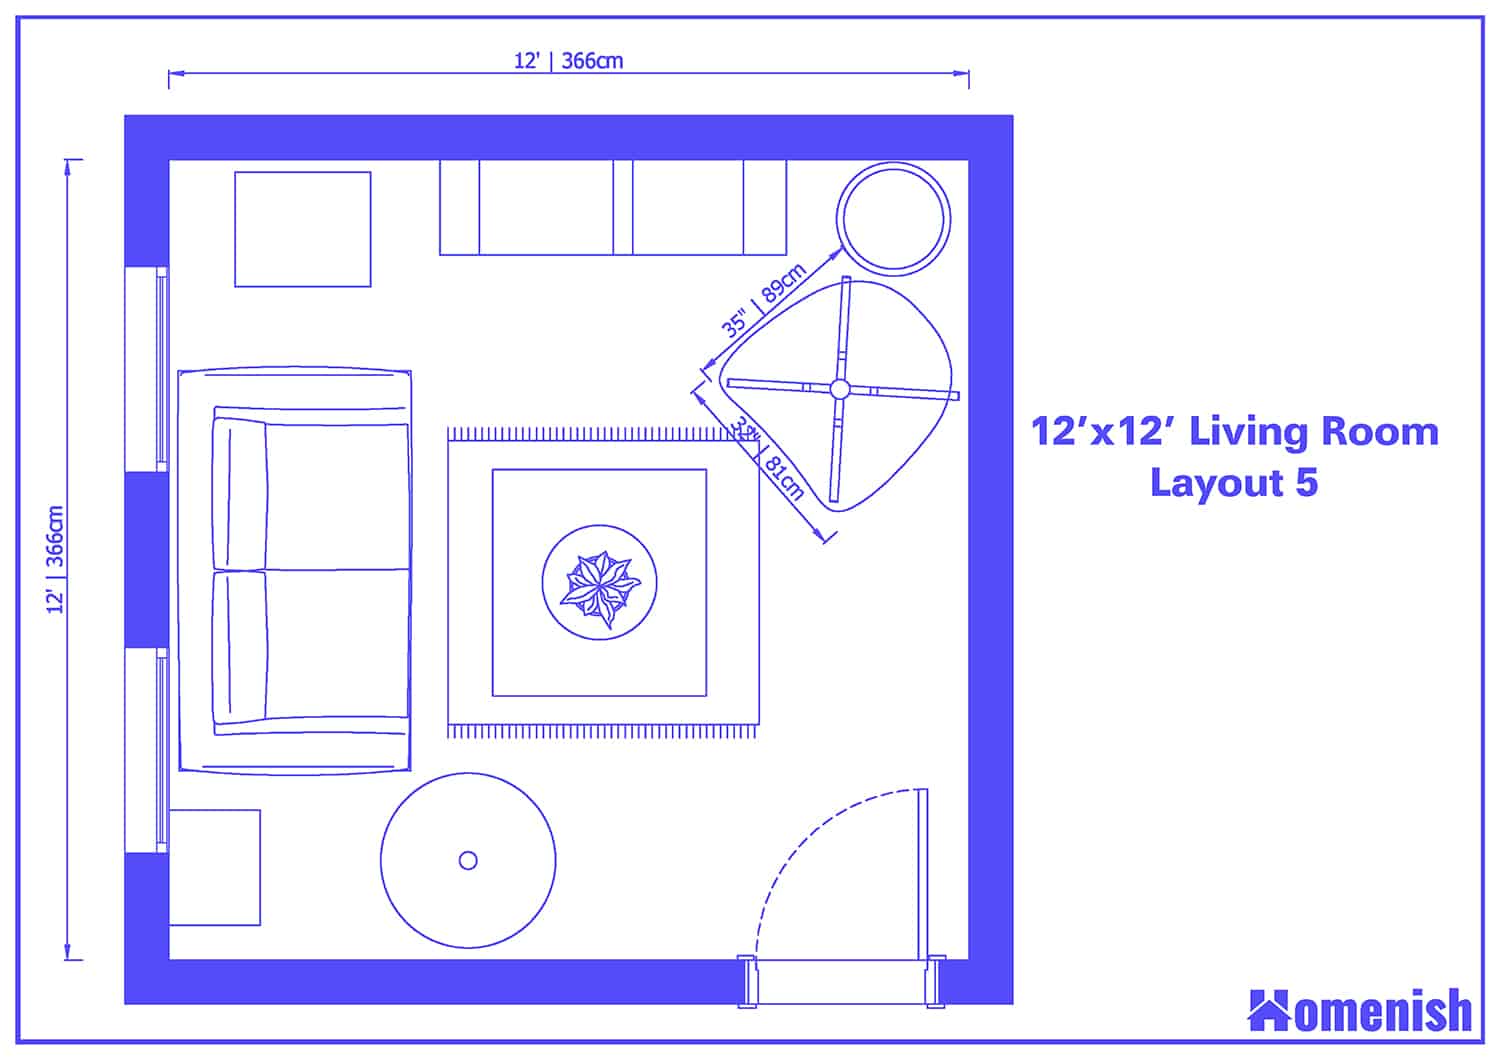 12' x 12' Living Room Layout 5